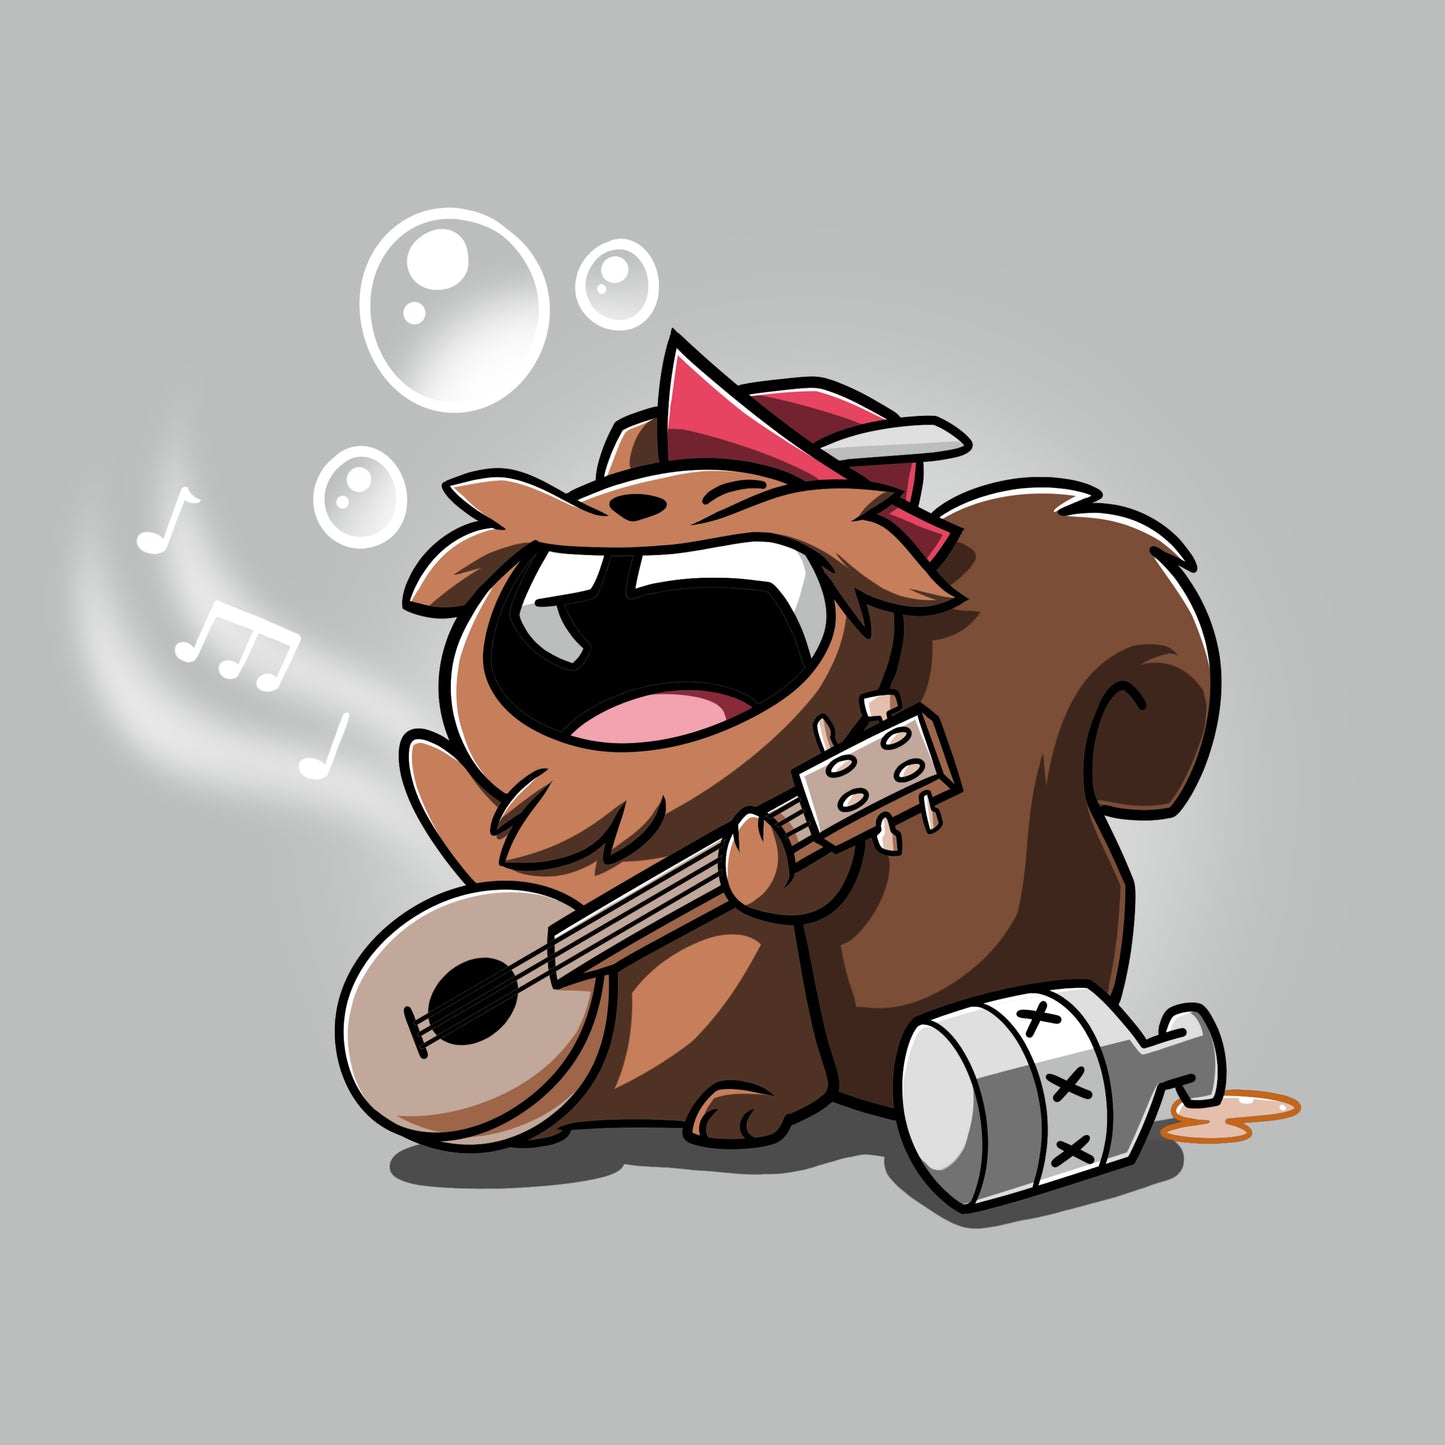 A Drunken Bard TeeTurtle cartoon squirrel with a guitar playing amidst a sea of bubbles.